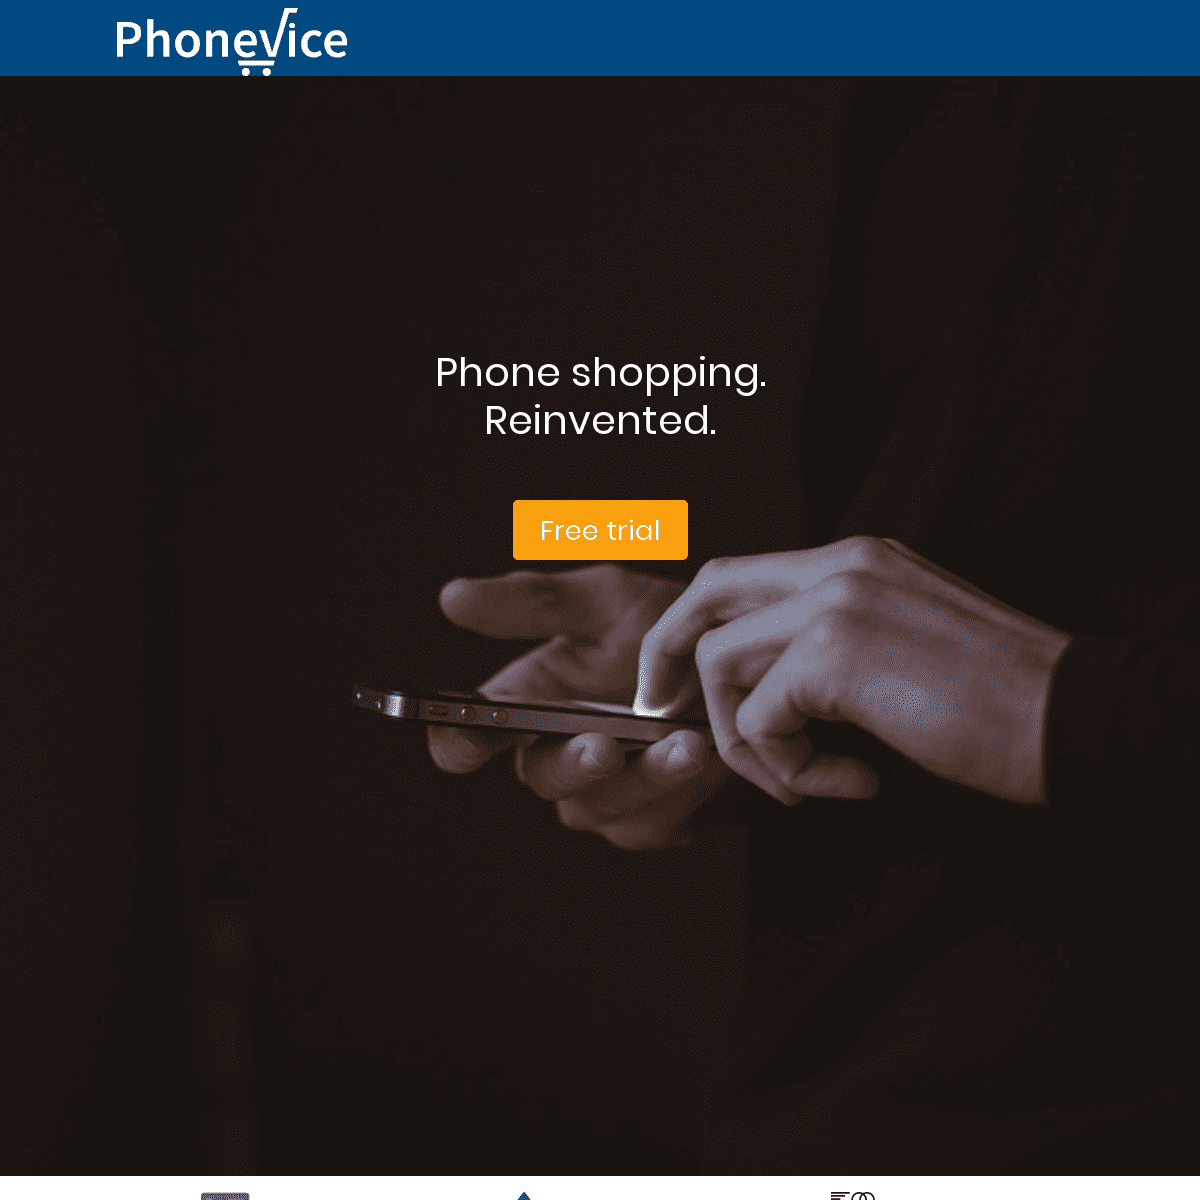 A complete backup of phonevice.com